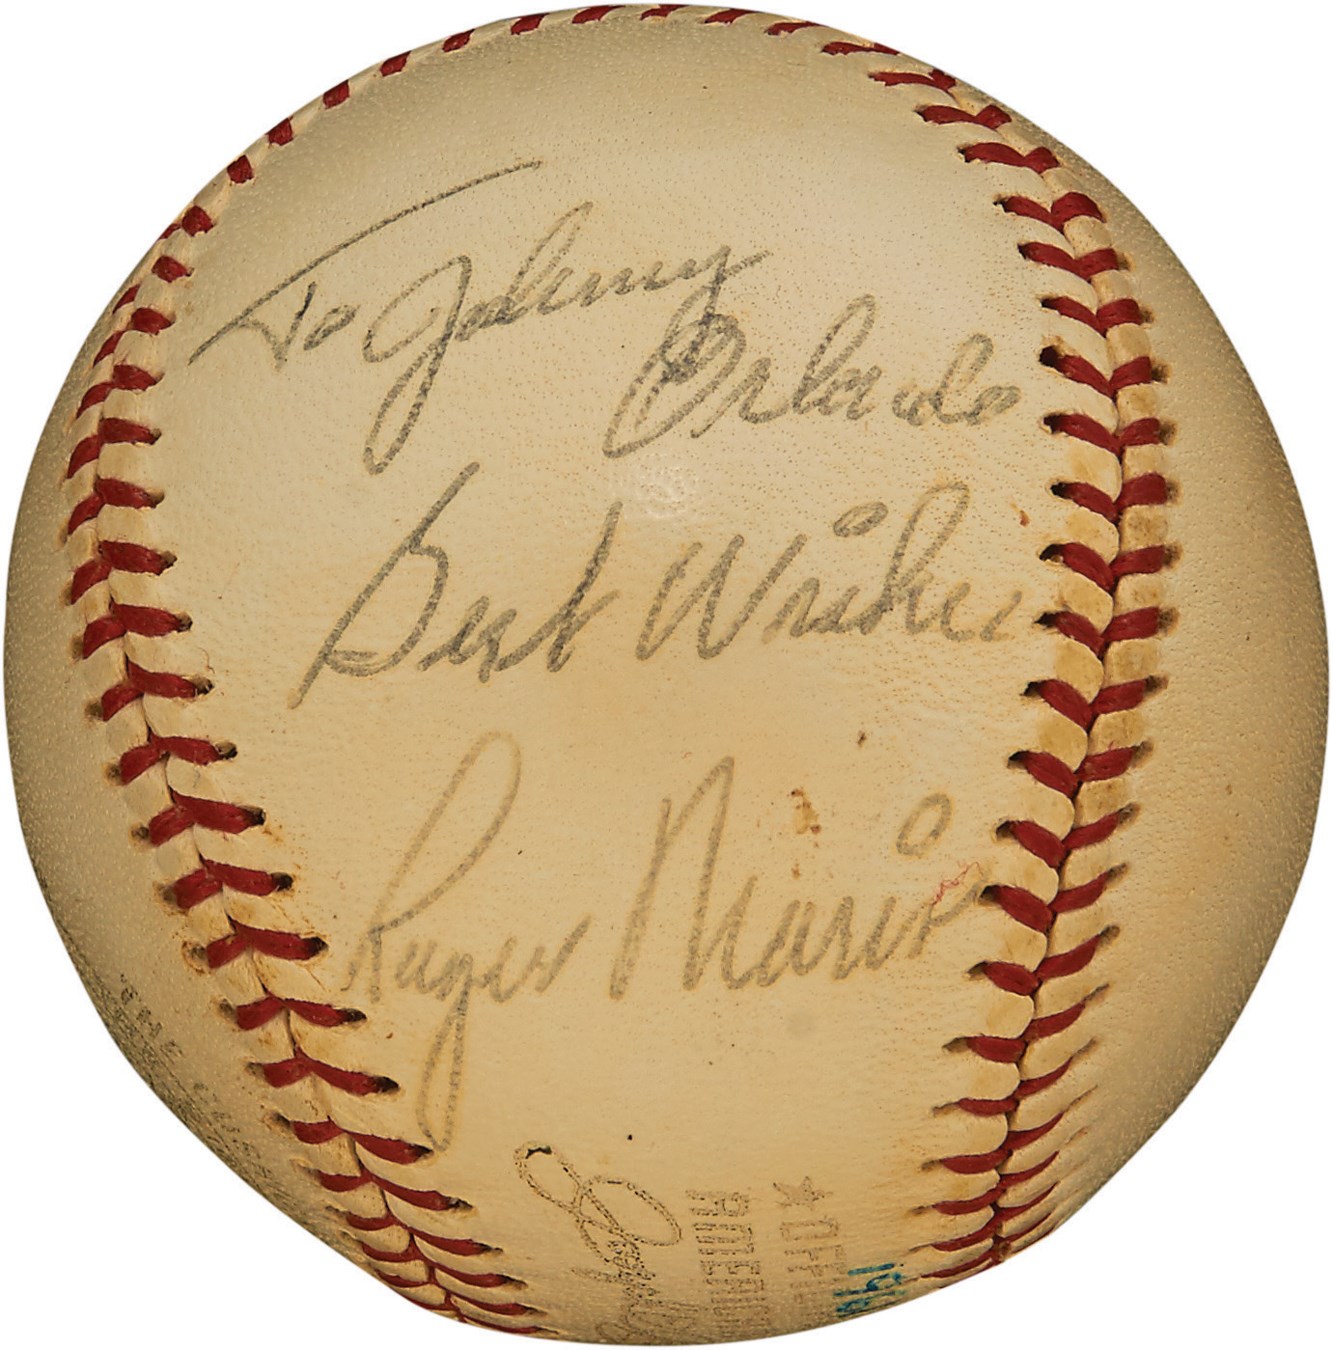 Mantle and Maris - 1961 Roger Maris Signed Inscribed Baseball to Red Sox Equipment Manager (PSA)